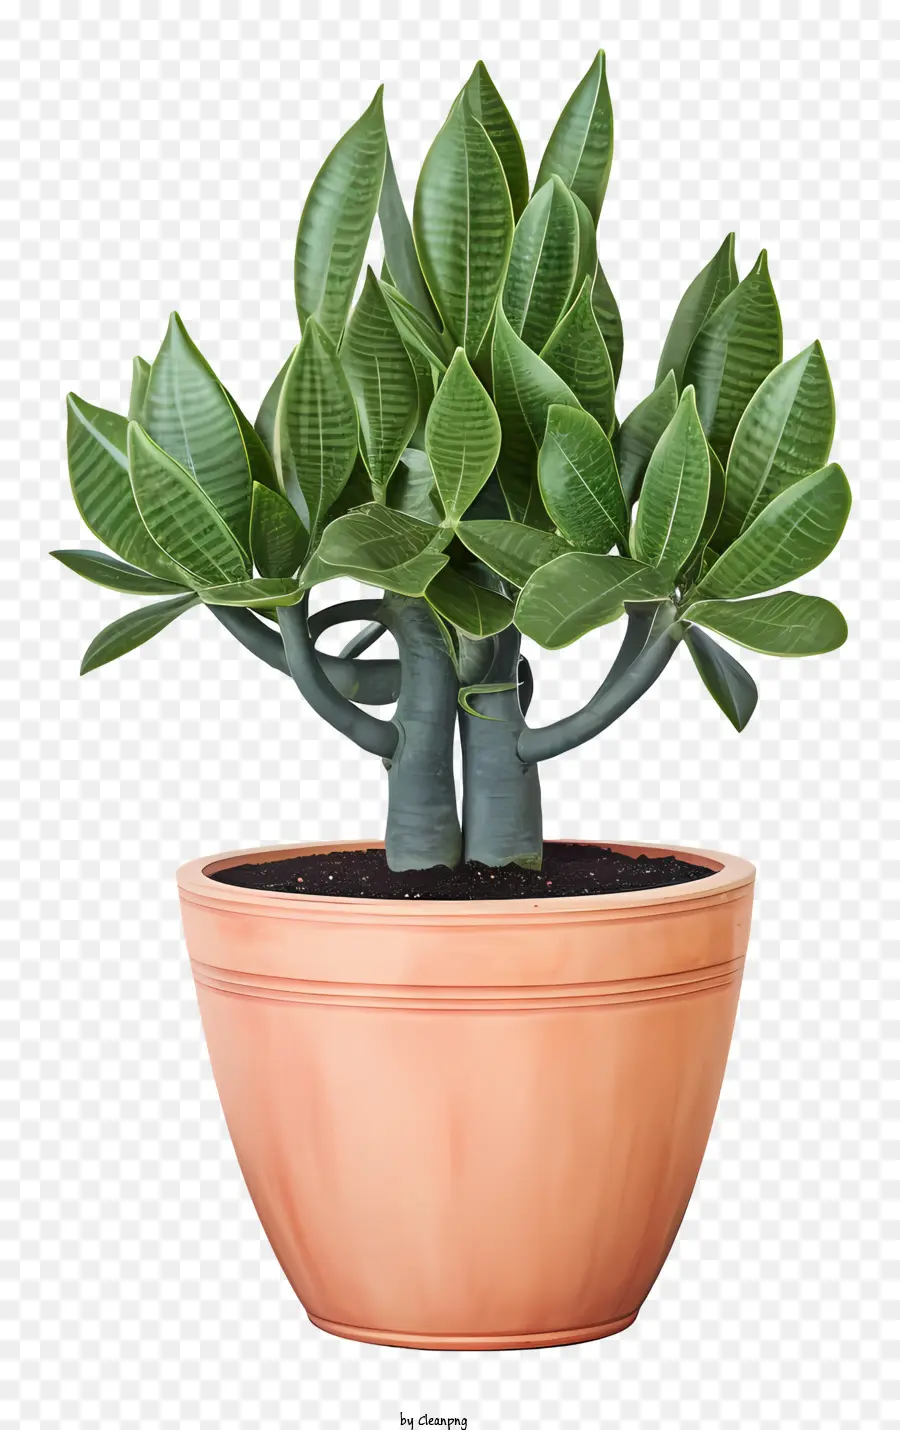 small potted plant green leaves fan-shaped leaves healthy plant vibrant stem